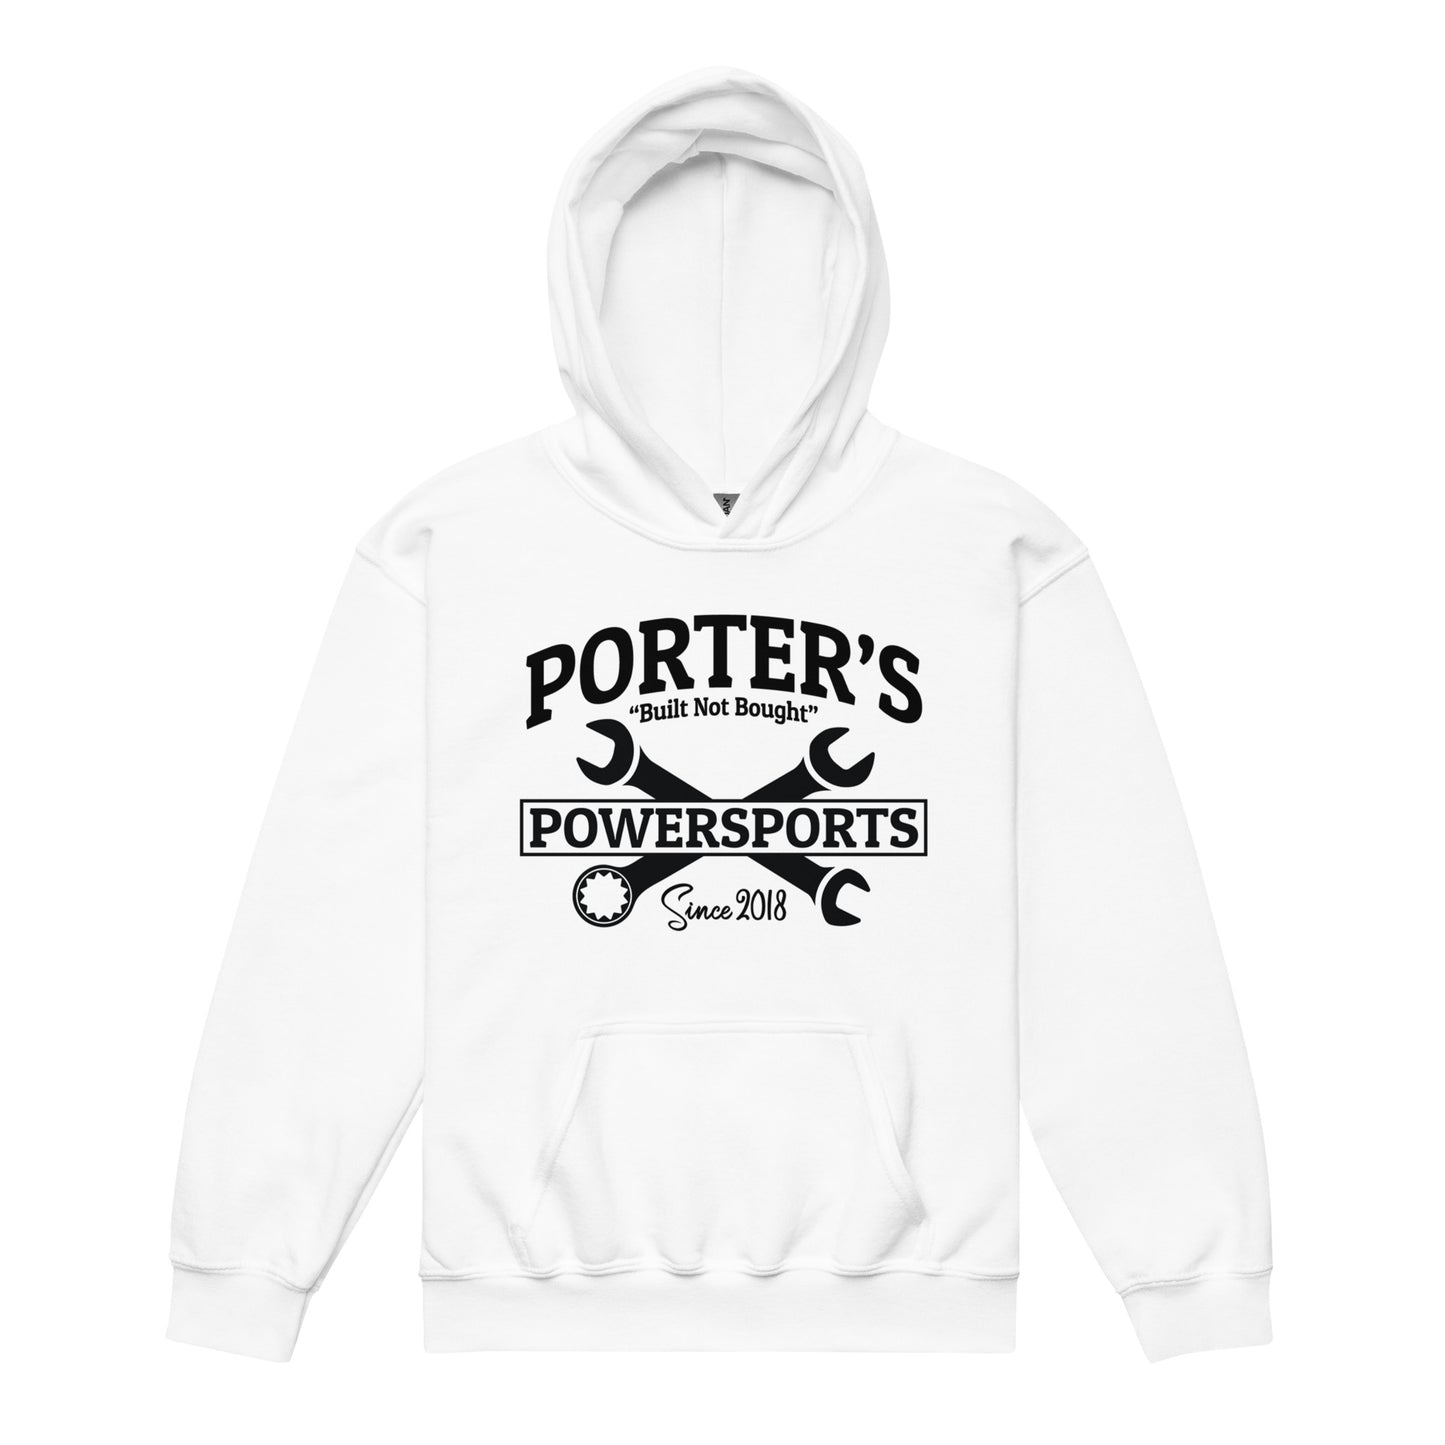 Porter's Powersports YOUTH Hoodie